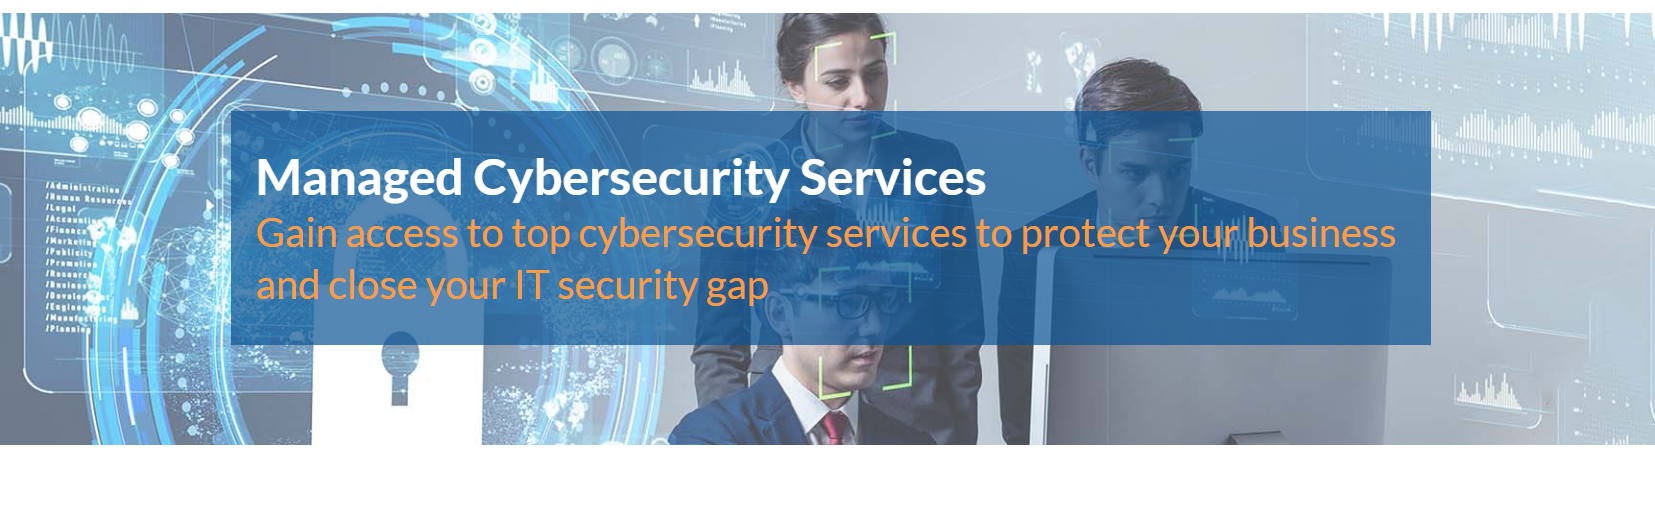 Managed Cybersecurity Services 1